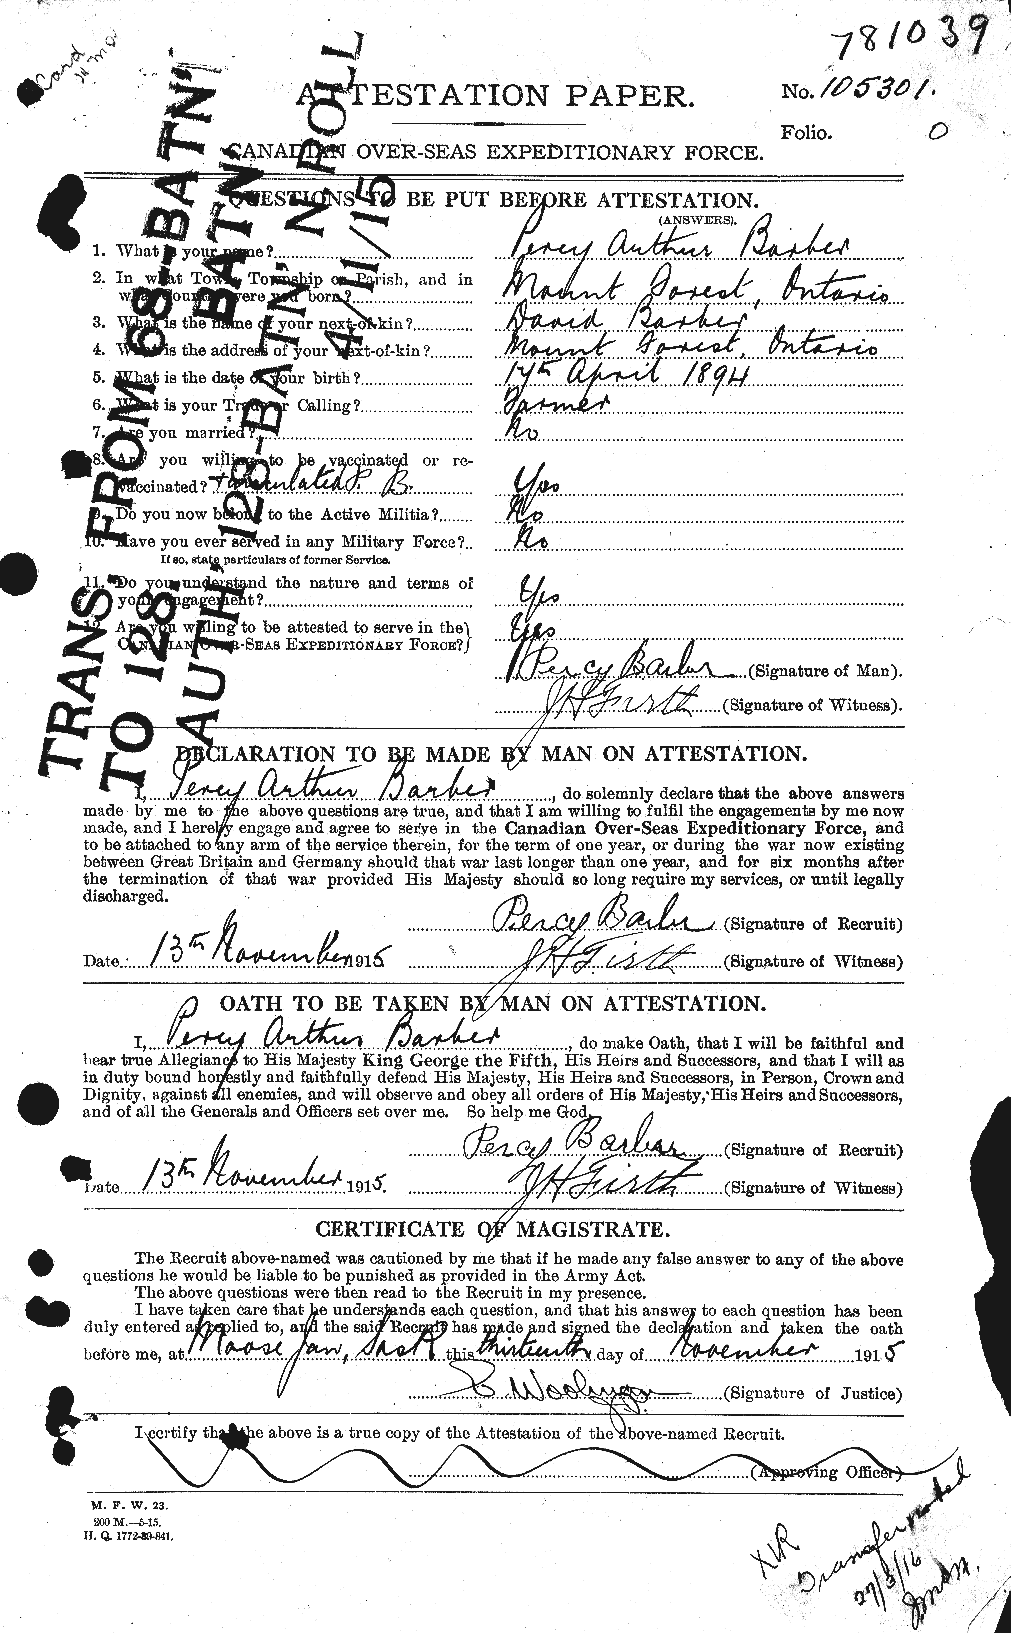 Personnel Records of the First World War - CEF 219059a